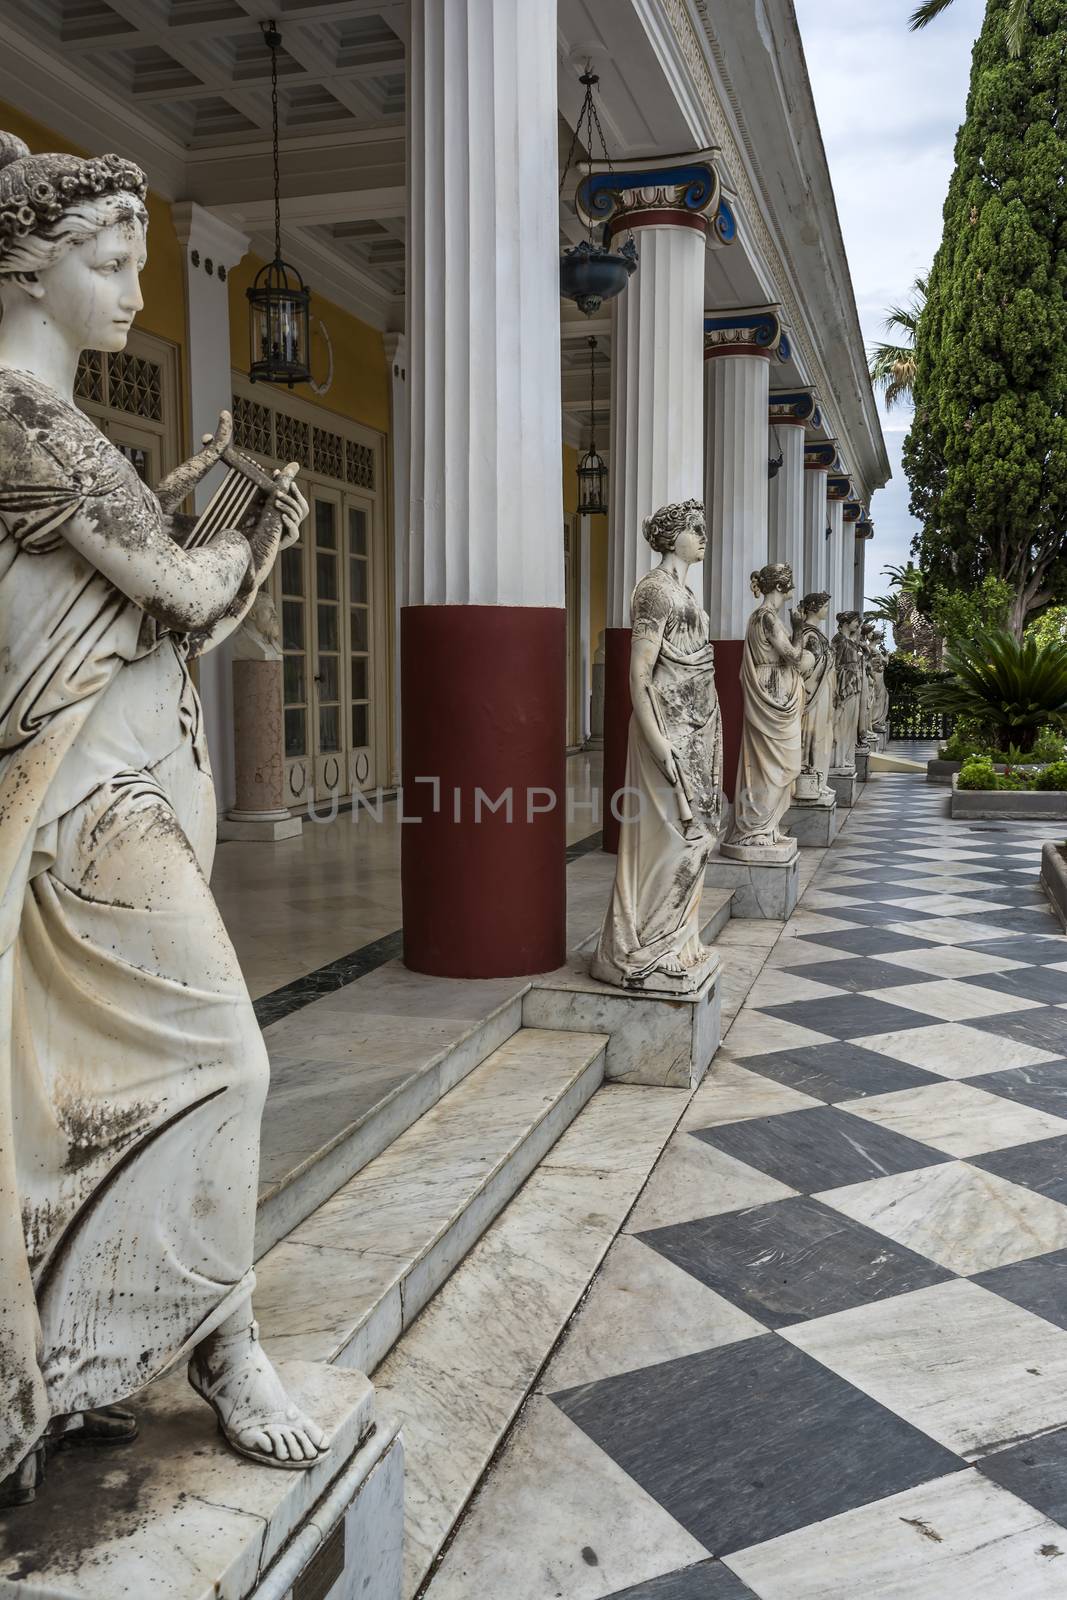 Statues of the nine muses at Achilleion Palace, island of Corfu. Achilleion was built by Empress Elisabeth of Austria, known as "Sissi". by ankarb